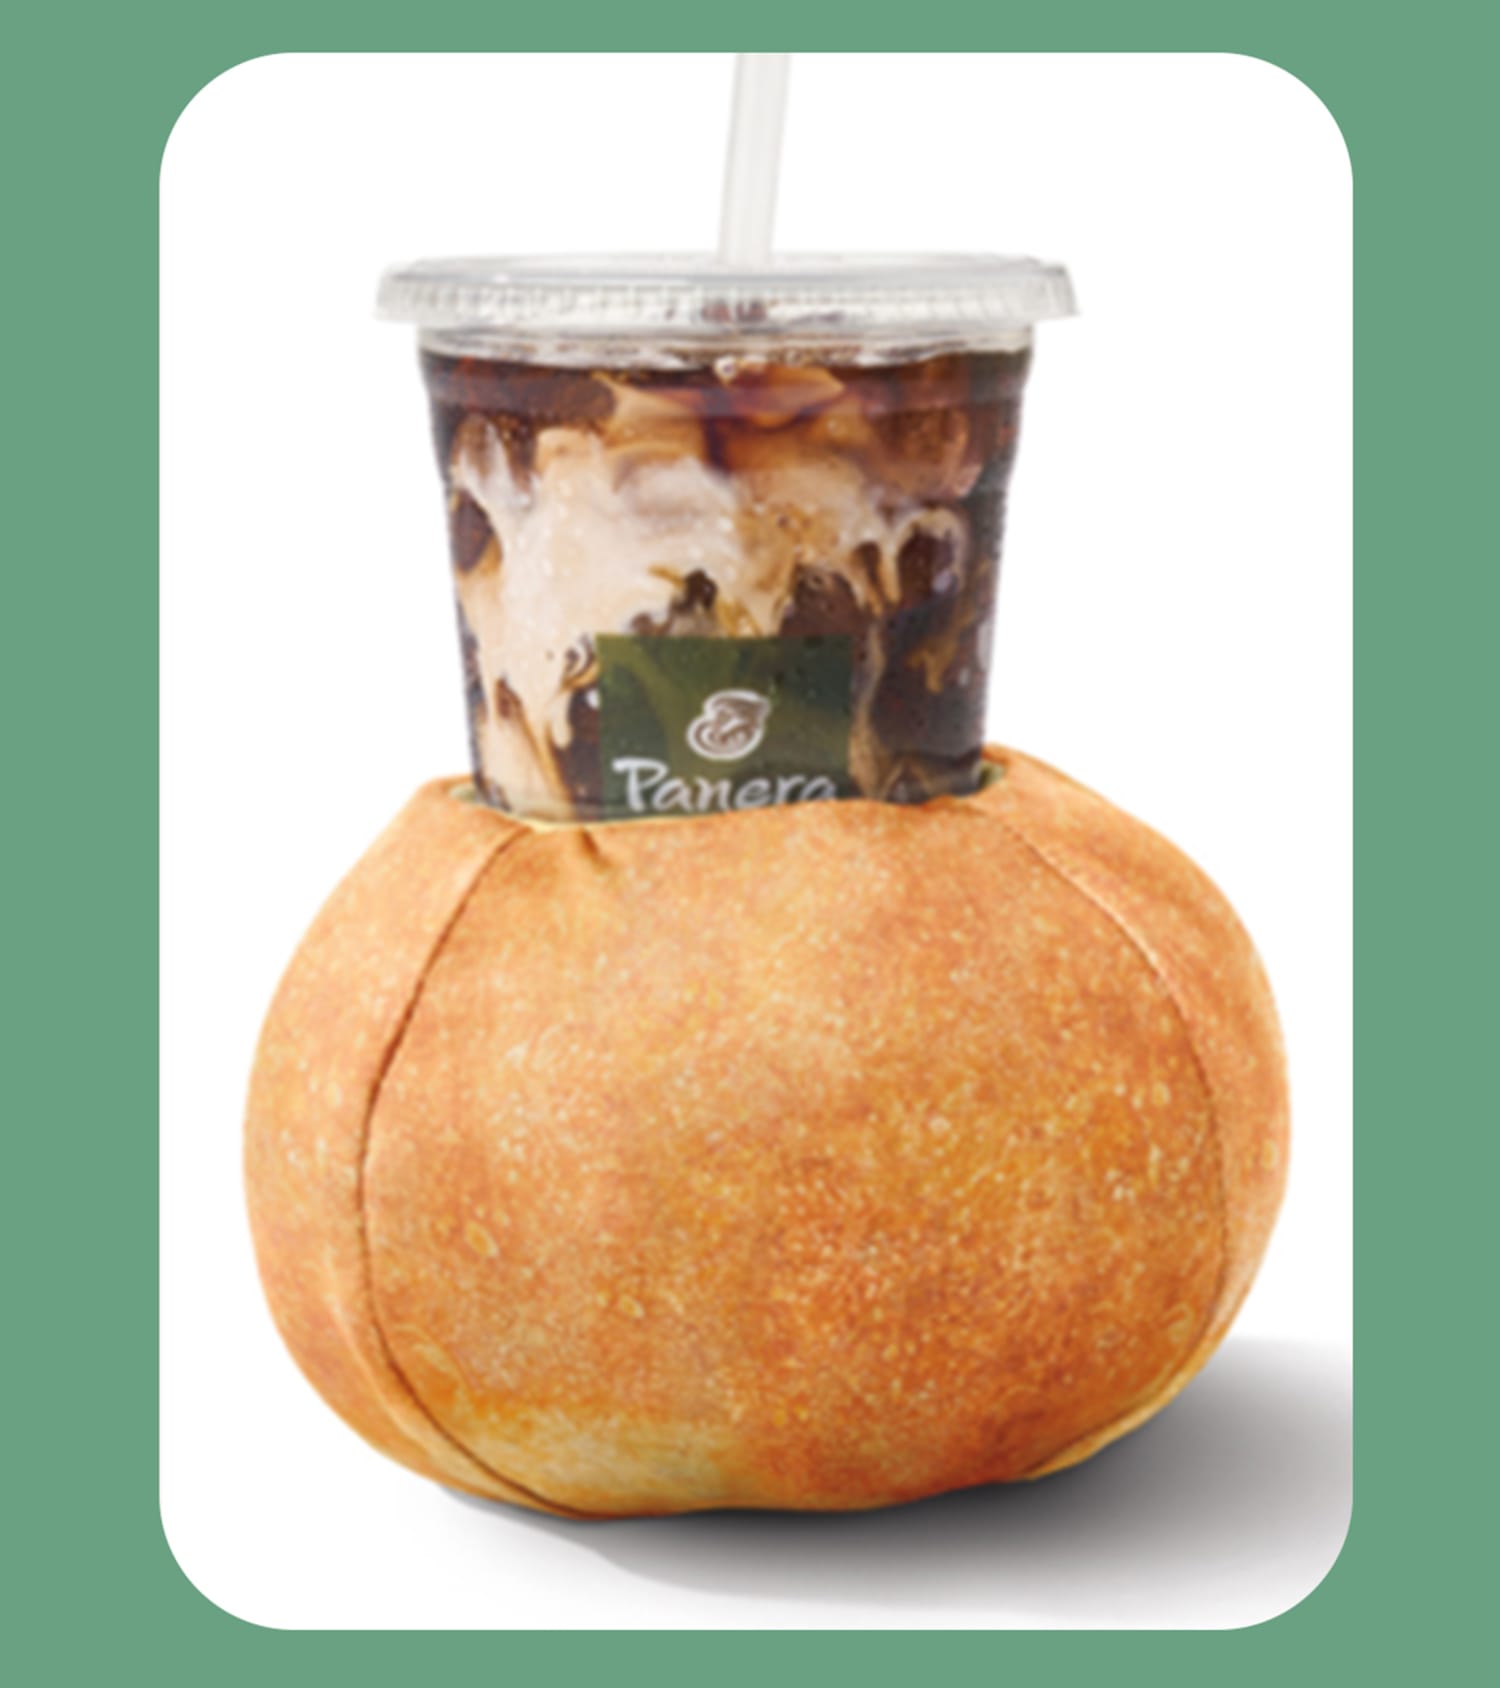 Panera Launches Bread Bowl Glove For Winter Iced Coffee Drinkers